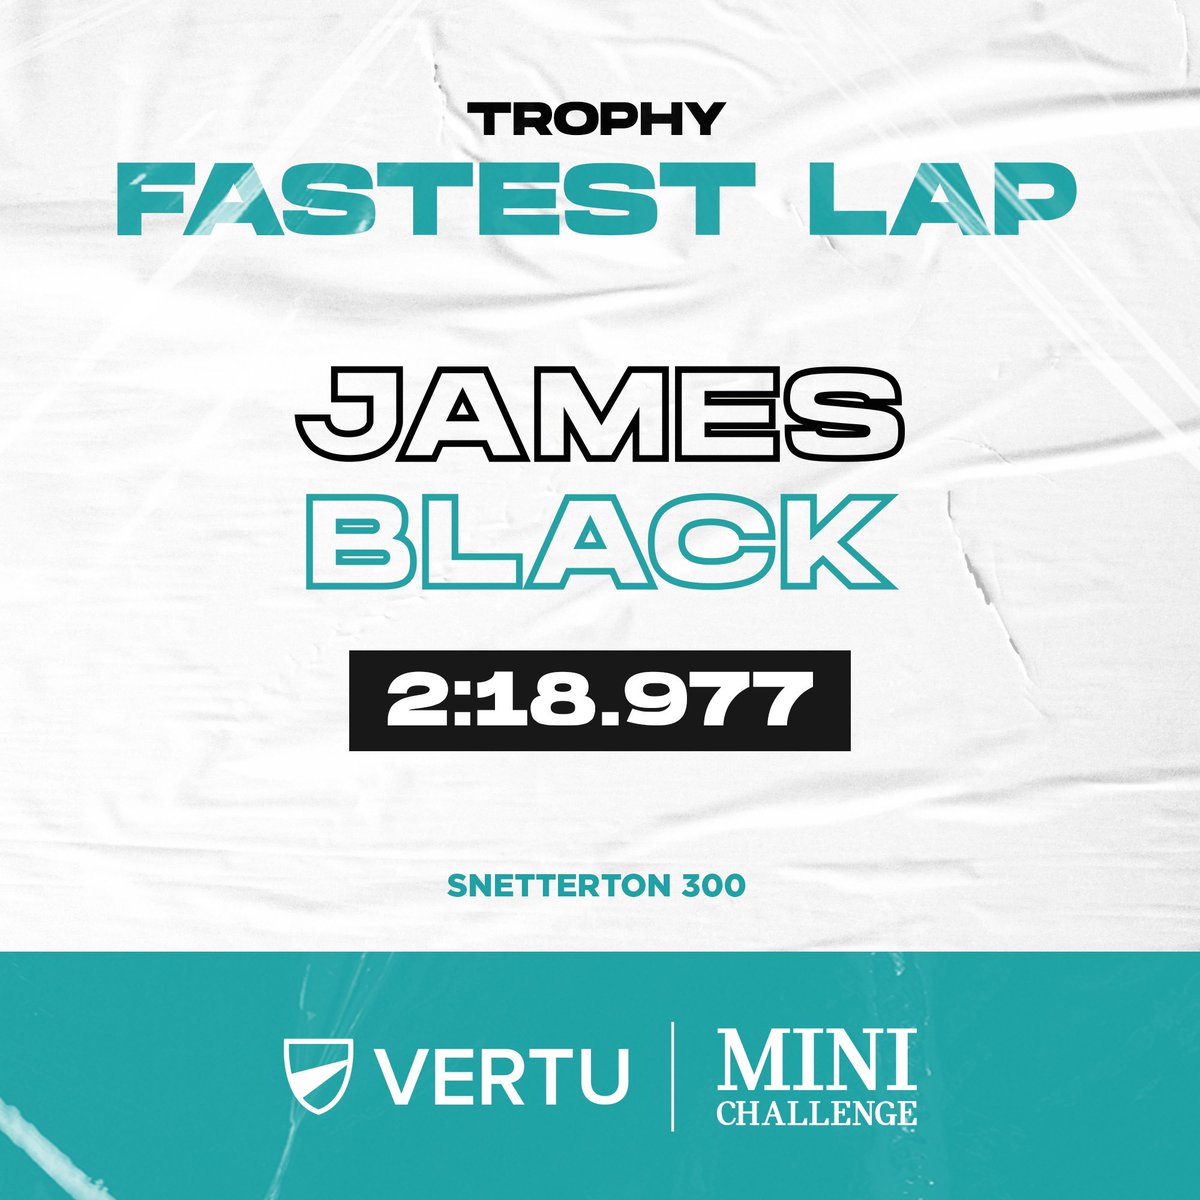 FASTEST LAP: The final race of the day at Snetterton sees James Black claim the fastest lap for the second time today! #VertuMINICHALLENGE #FastestLap